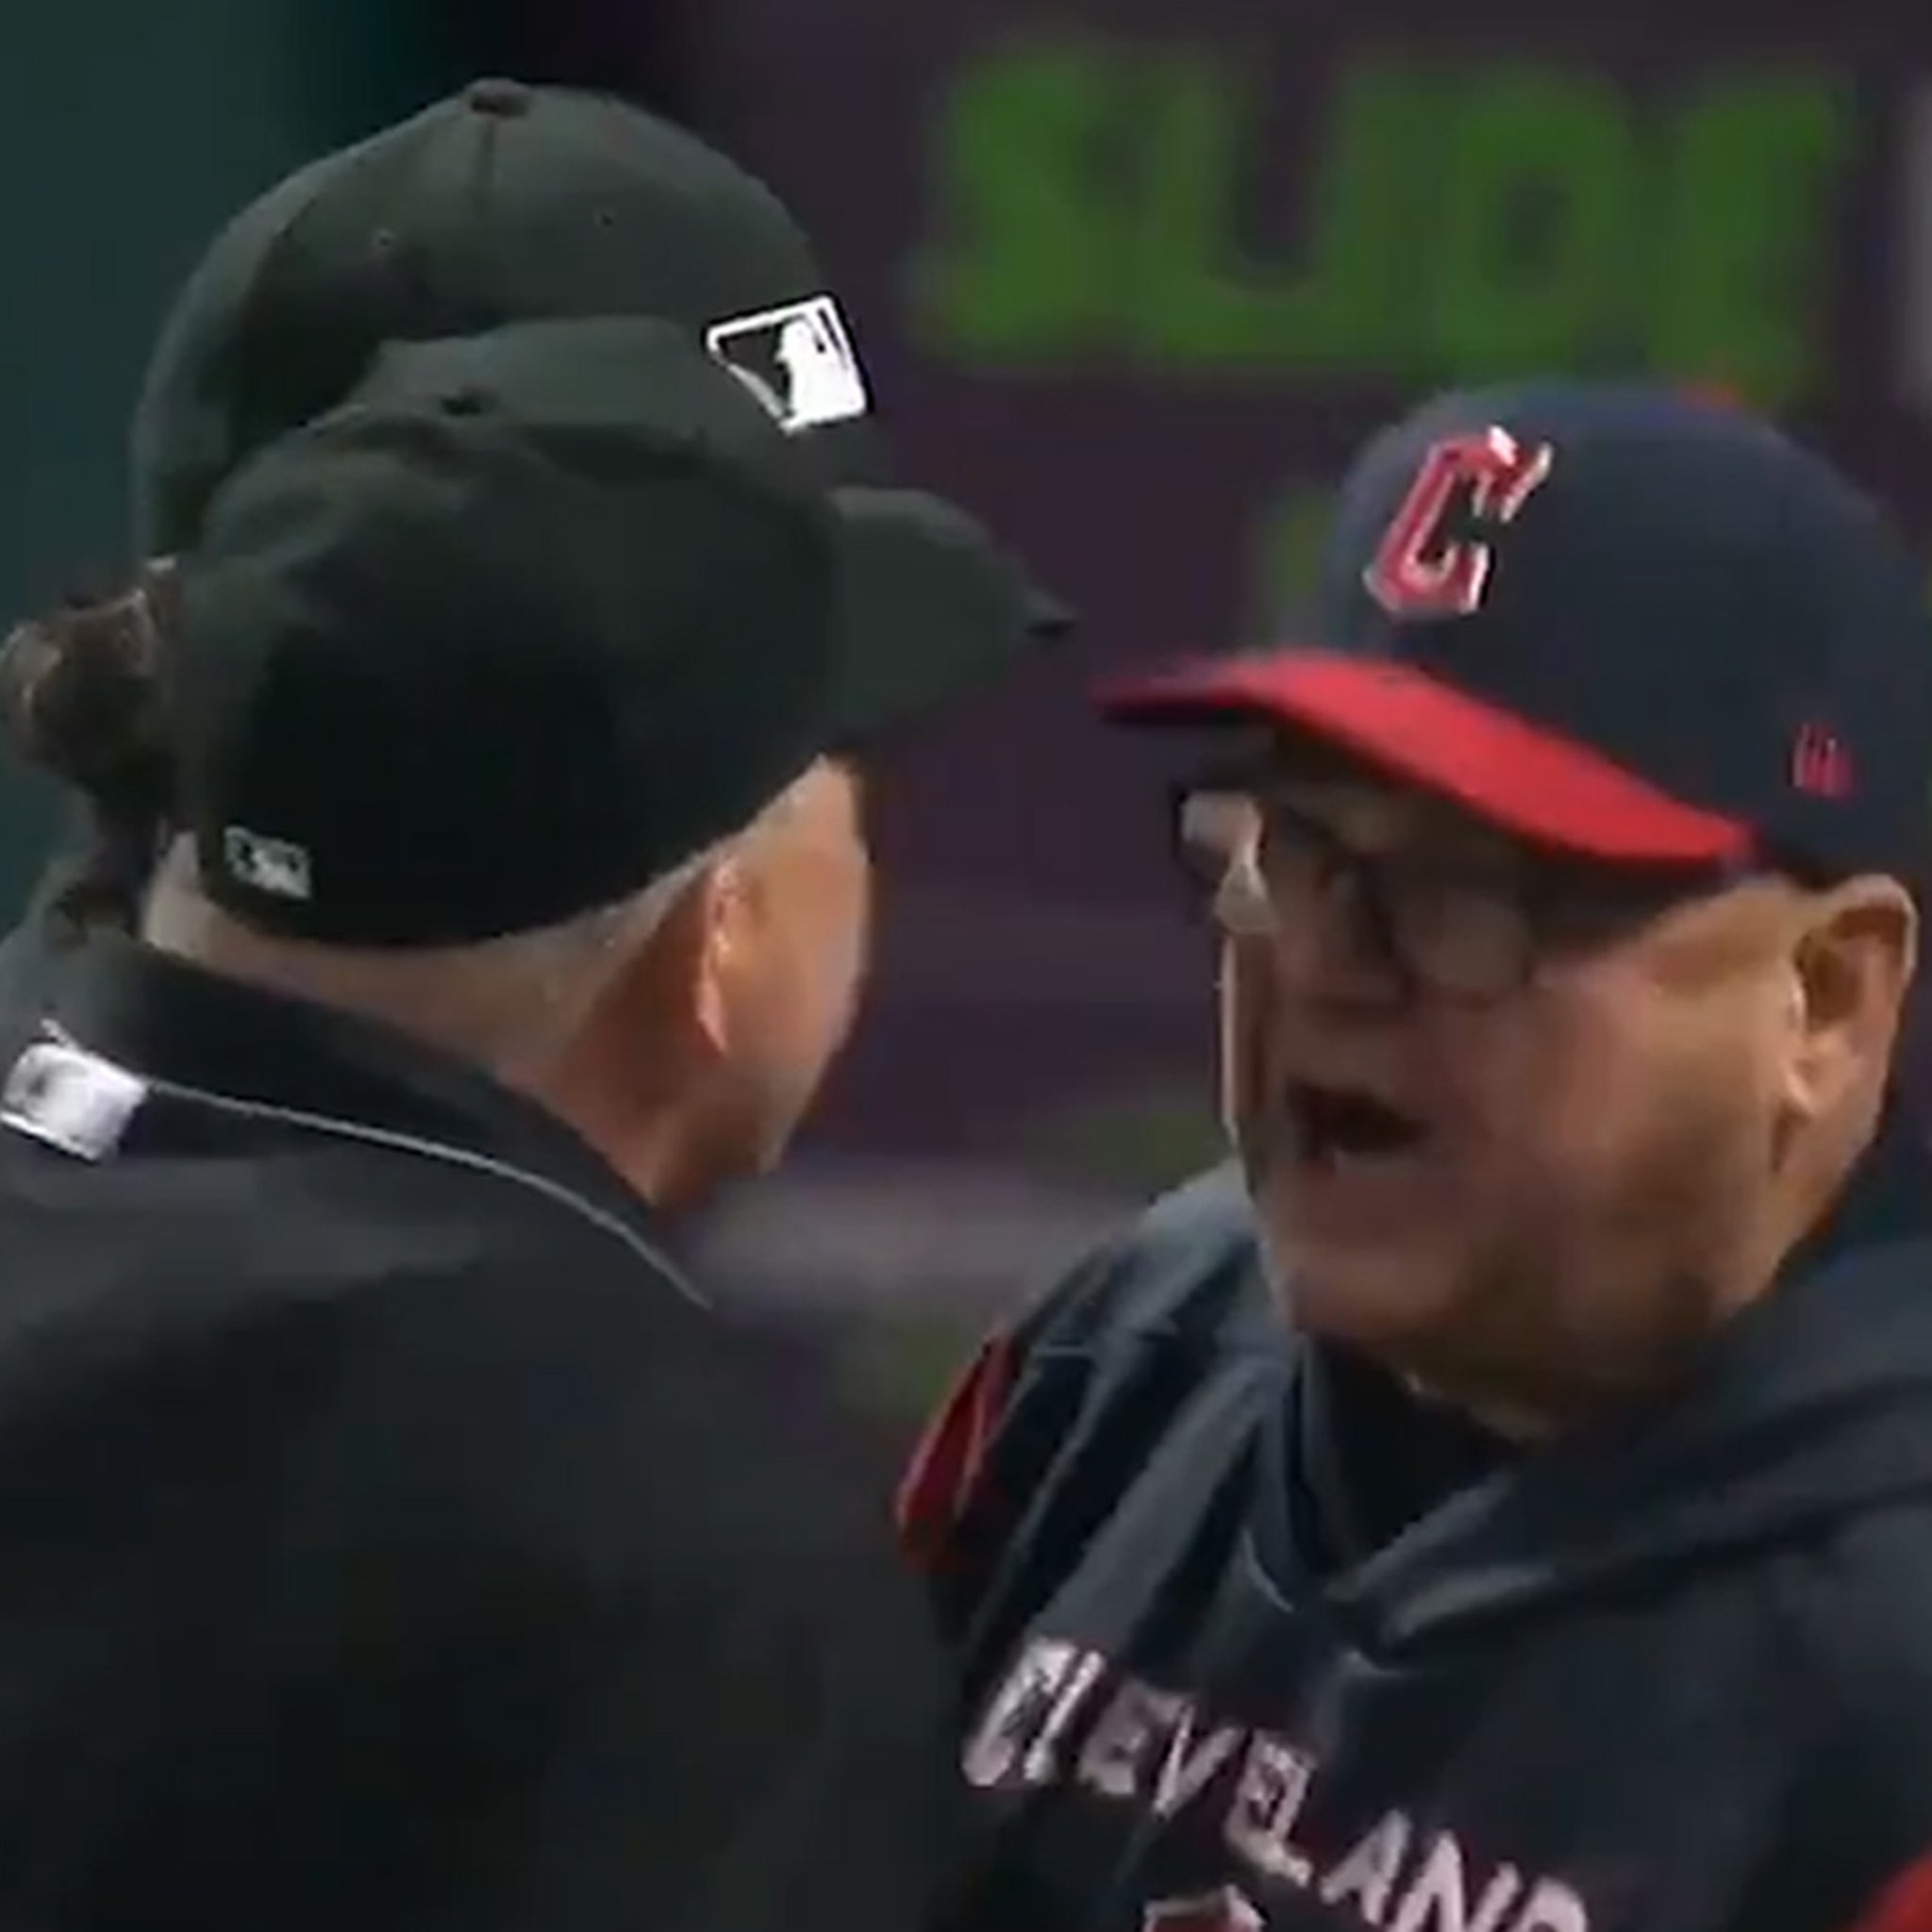 Terry Francona just can't stop flipping off cameras during baseball games